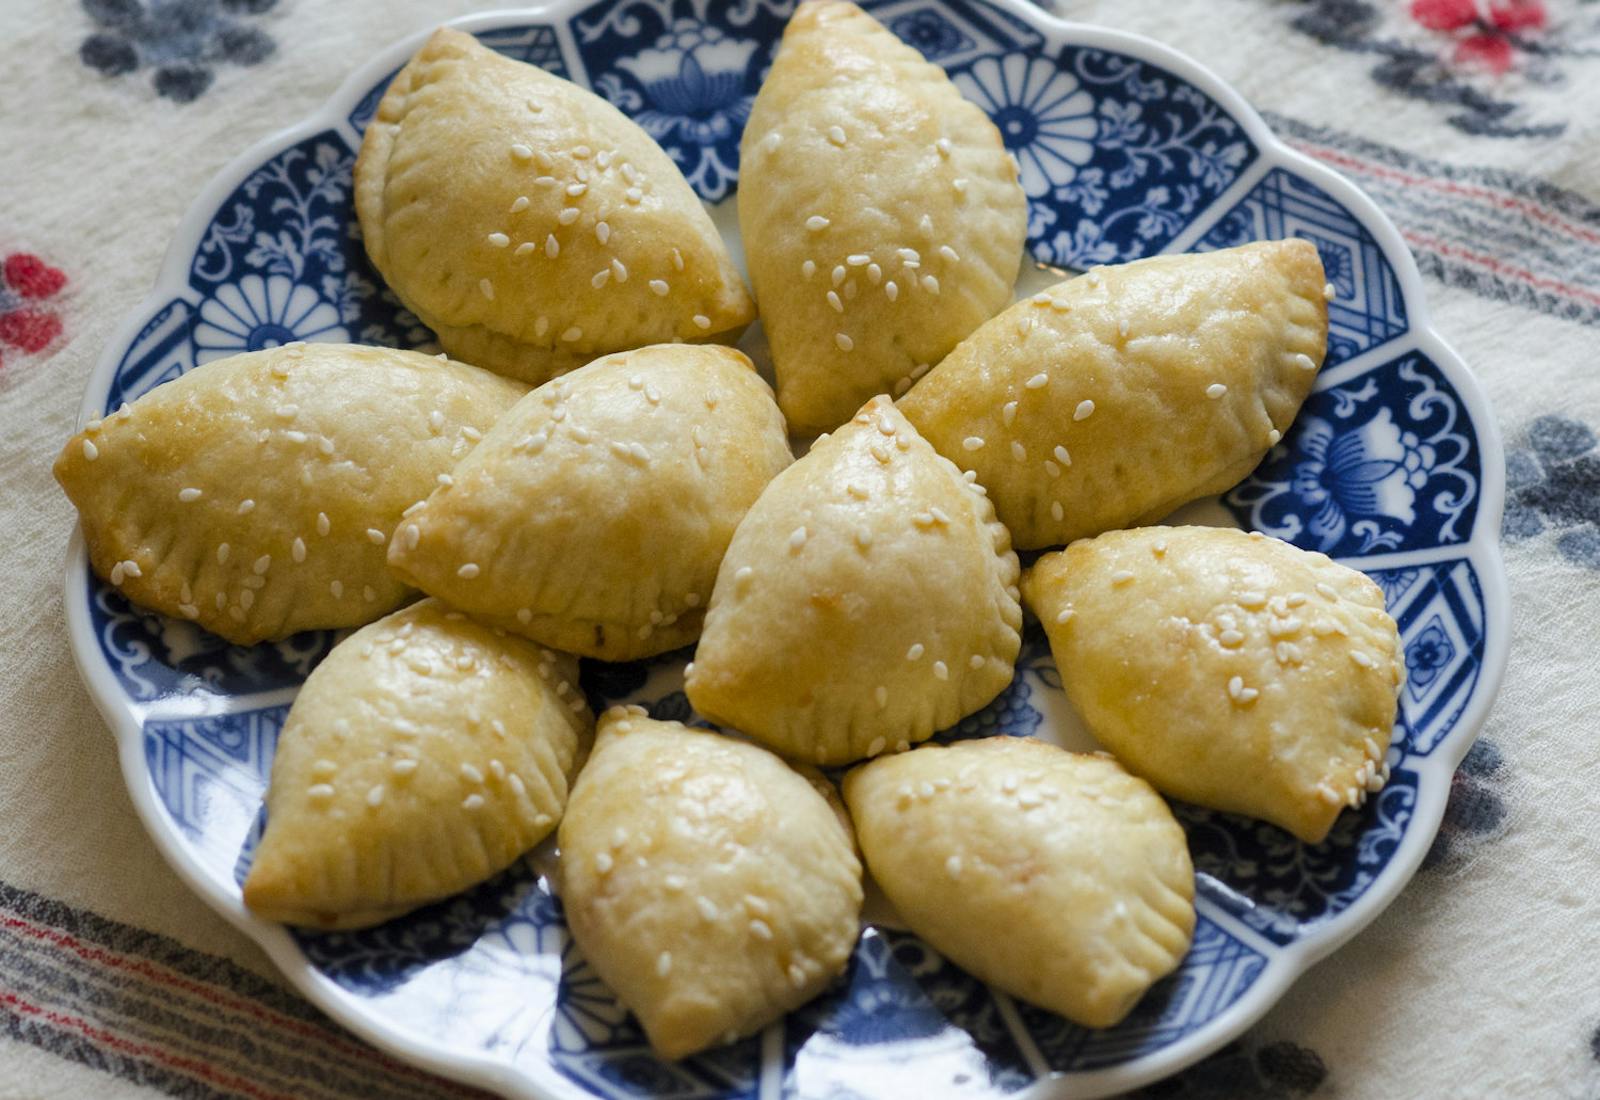 Cheese sambusak with sesame seeds on blue scalloped dish atop woven tablecloth.